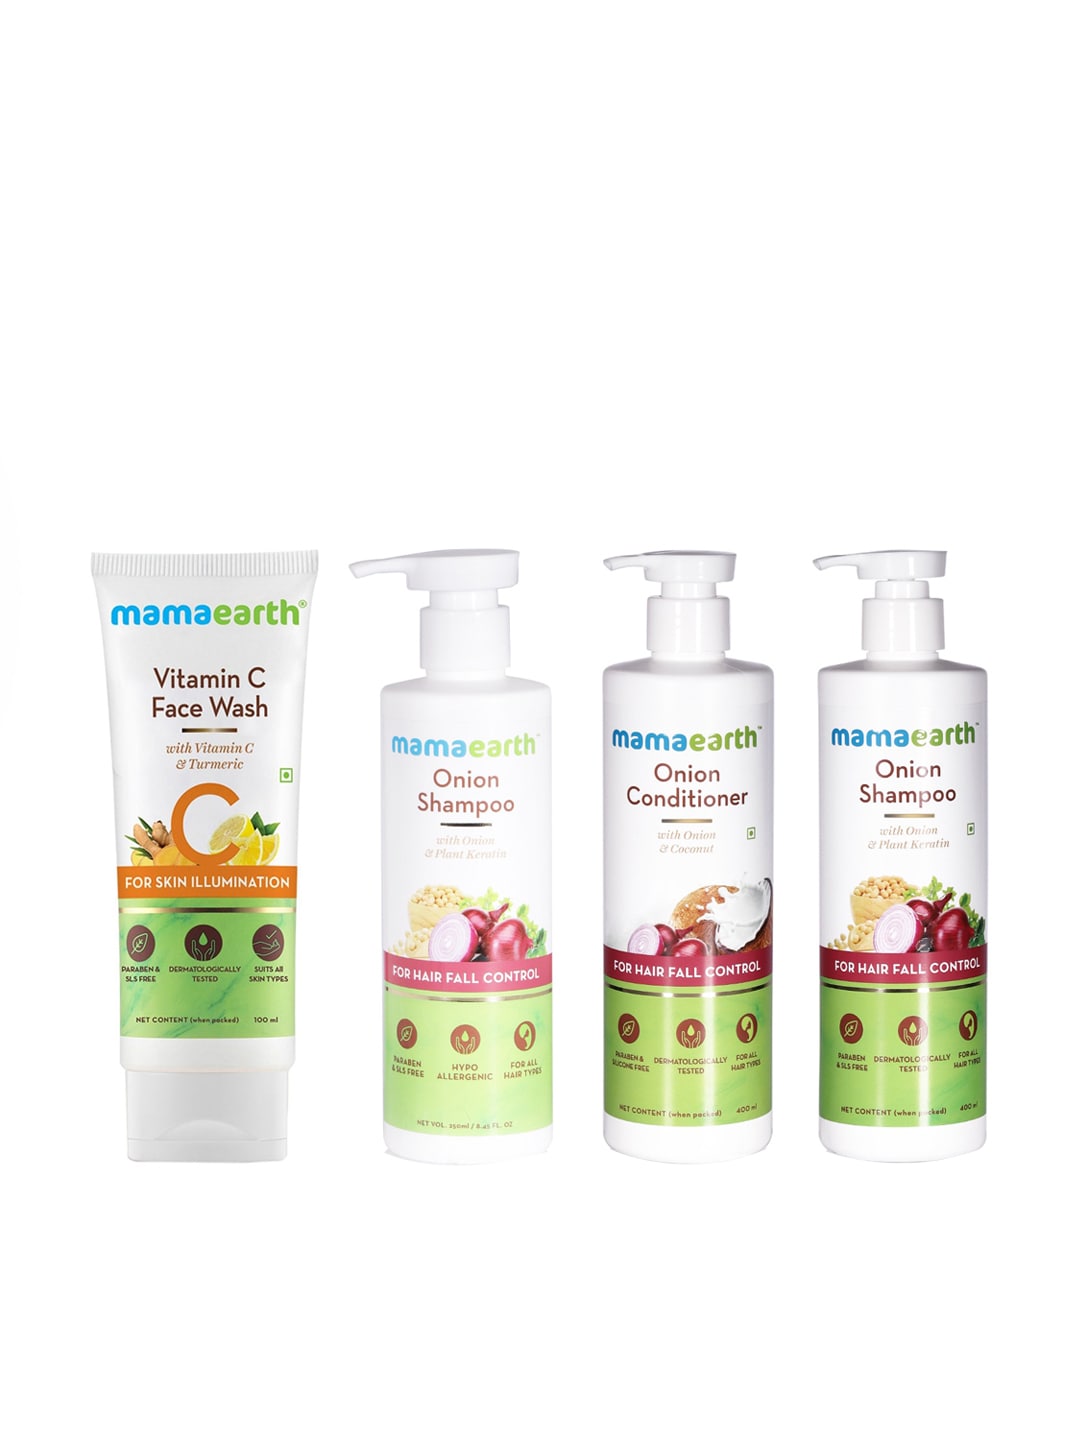 Mamaearth Unisex Set of 2 Shampoos, Hair Conditioner & Vitamin C Face Wash Price in India